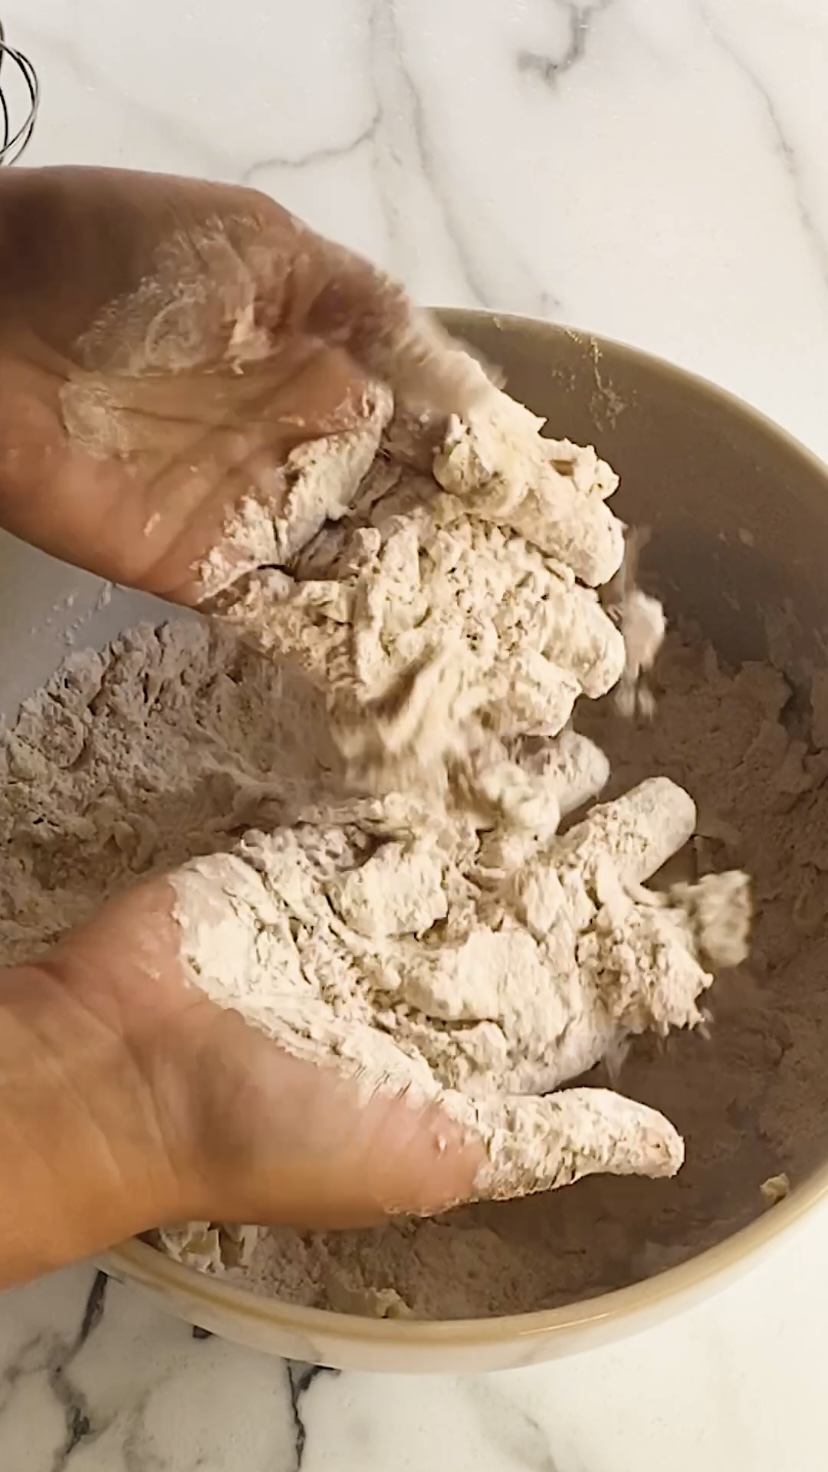 Mixing butter into flour with hands.